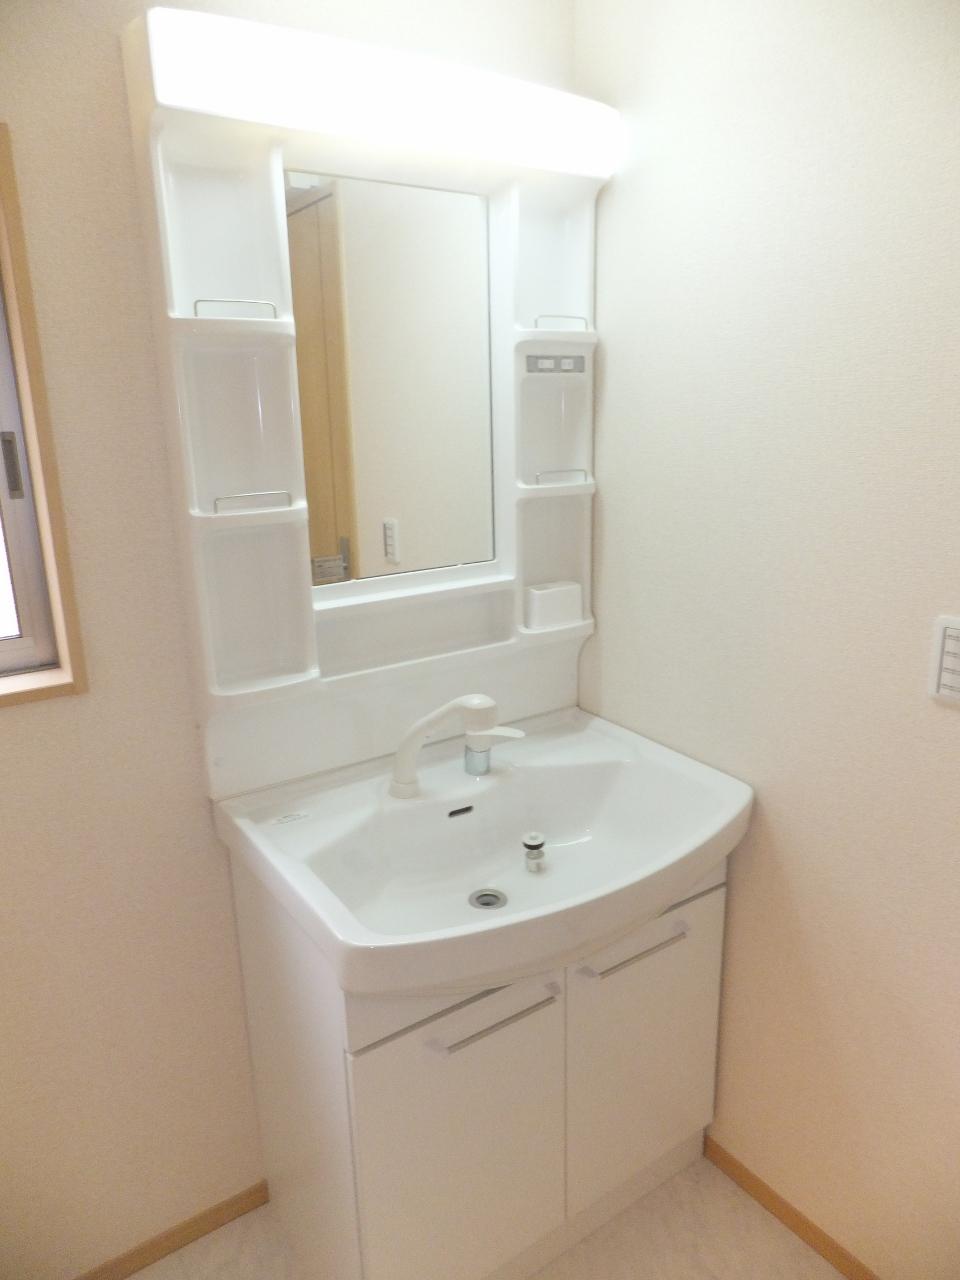 Wash basin, toilet. Vanity with excellent storage capacity and functionality! 